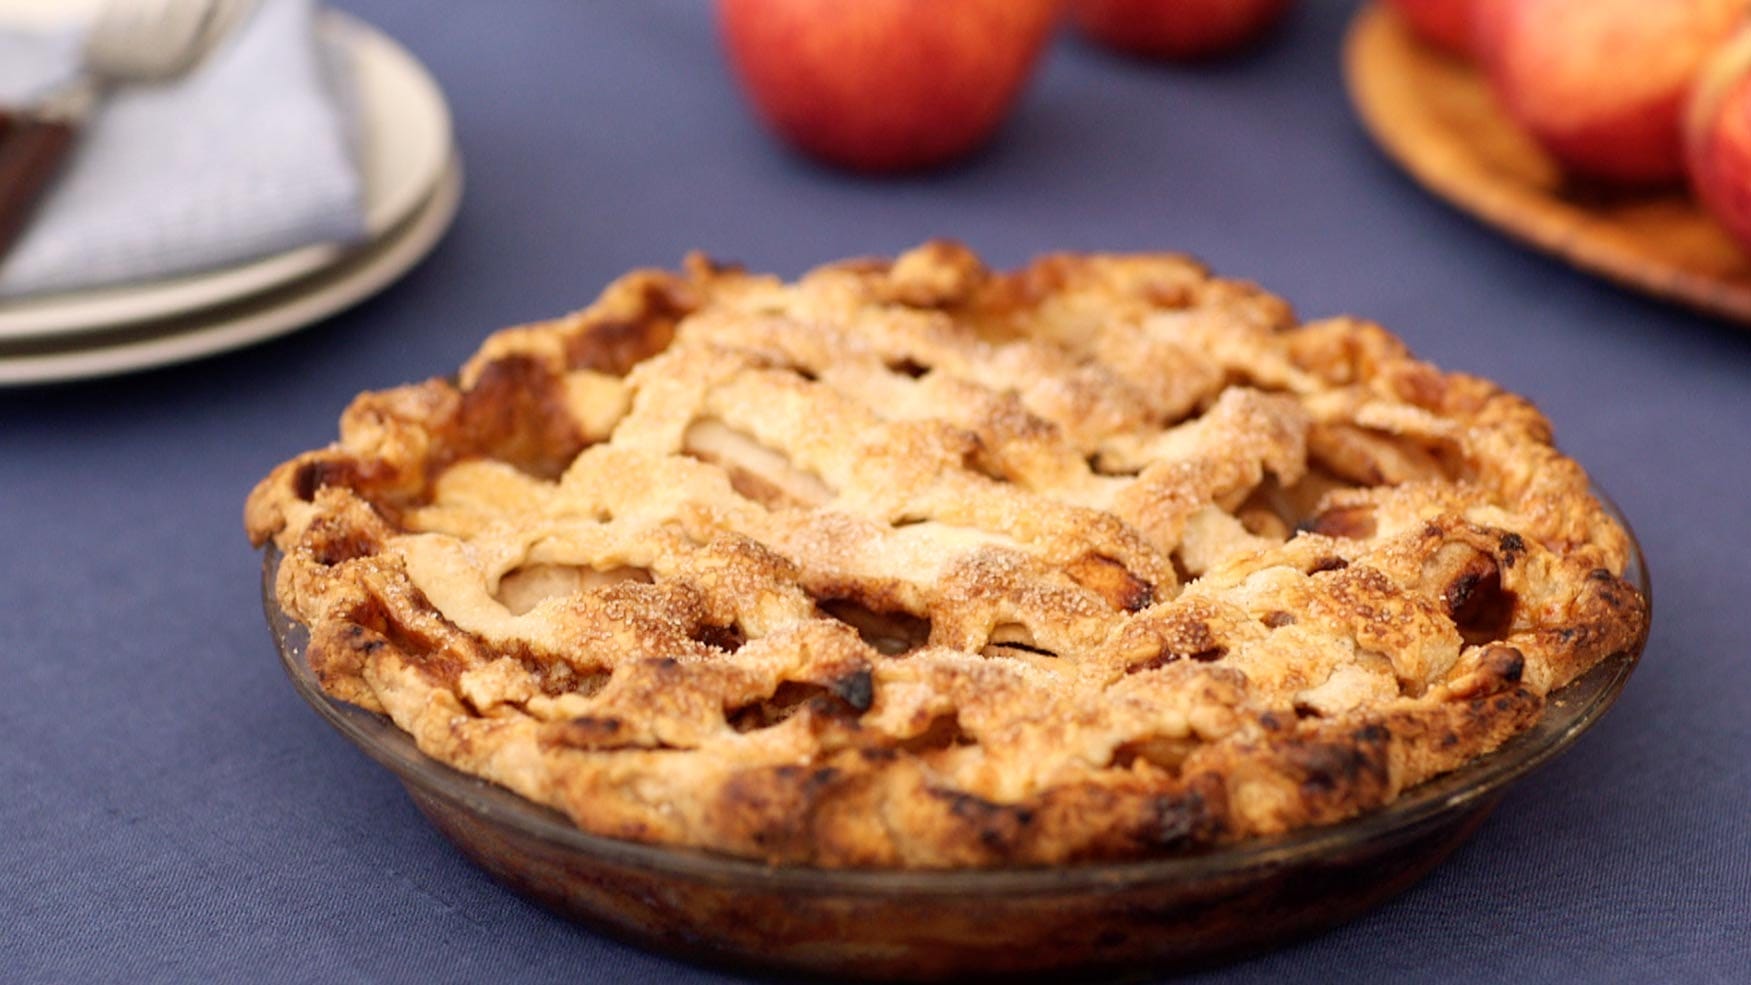 How To Make Salted Caramel Apple Pie - Afternoon Baking With Grandma